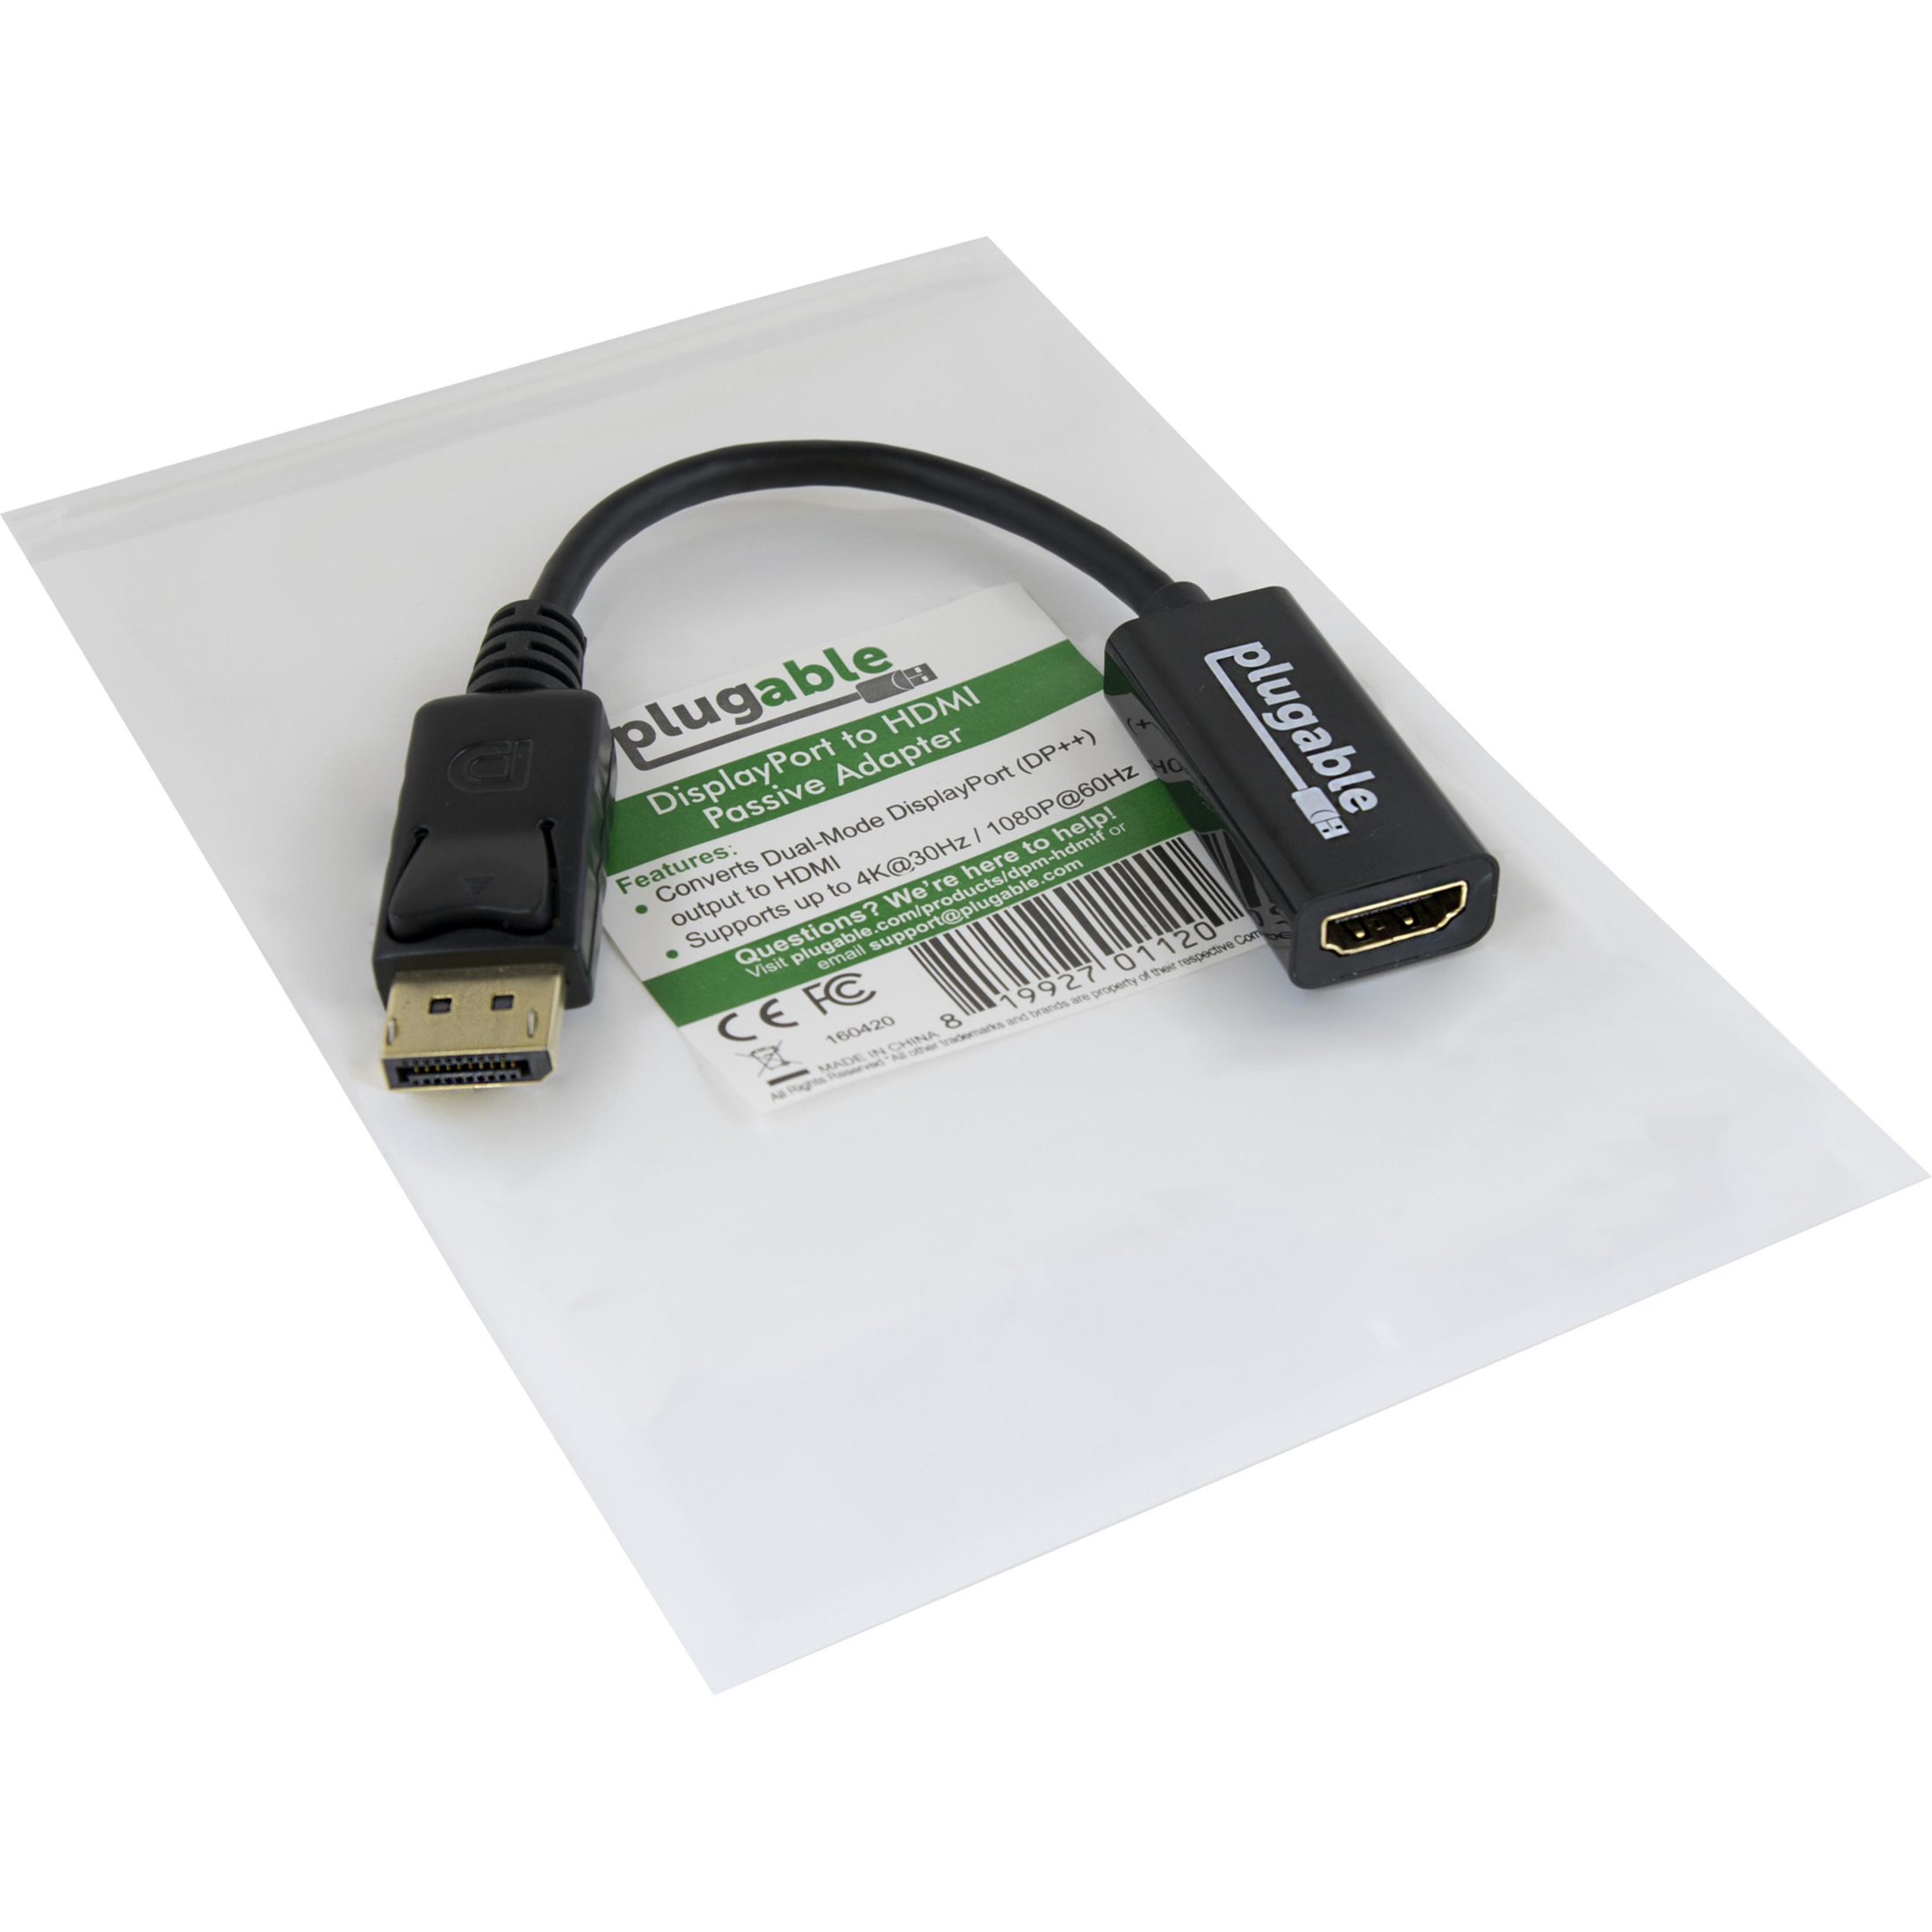 Plugable DisplayPort to HDMI Passive Adapter (Supports Windows and Linux Systems and Displays up to 4K UHD 3840x2160@30Hz) - image 3 of 5